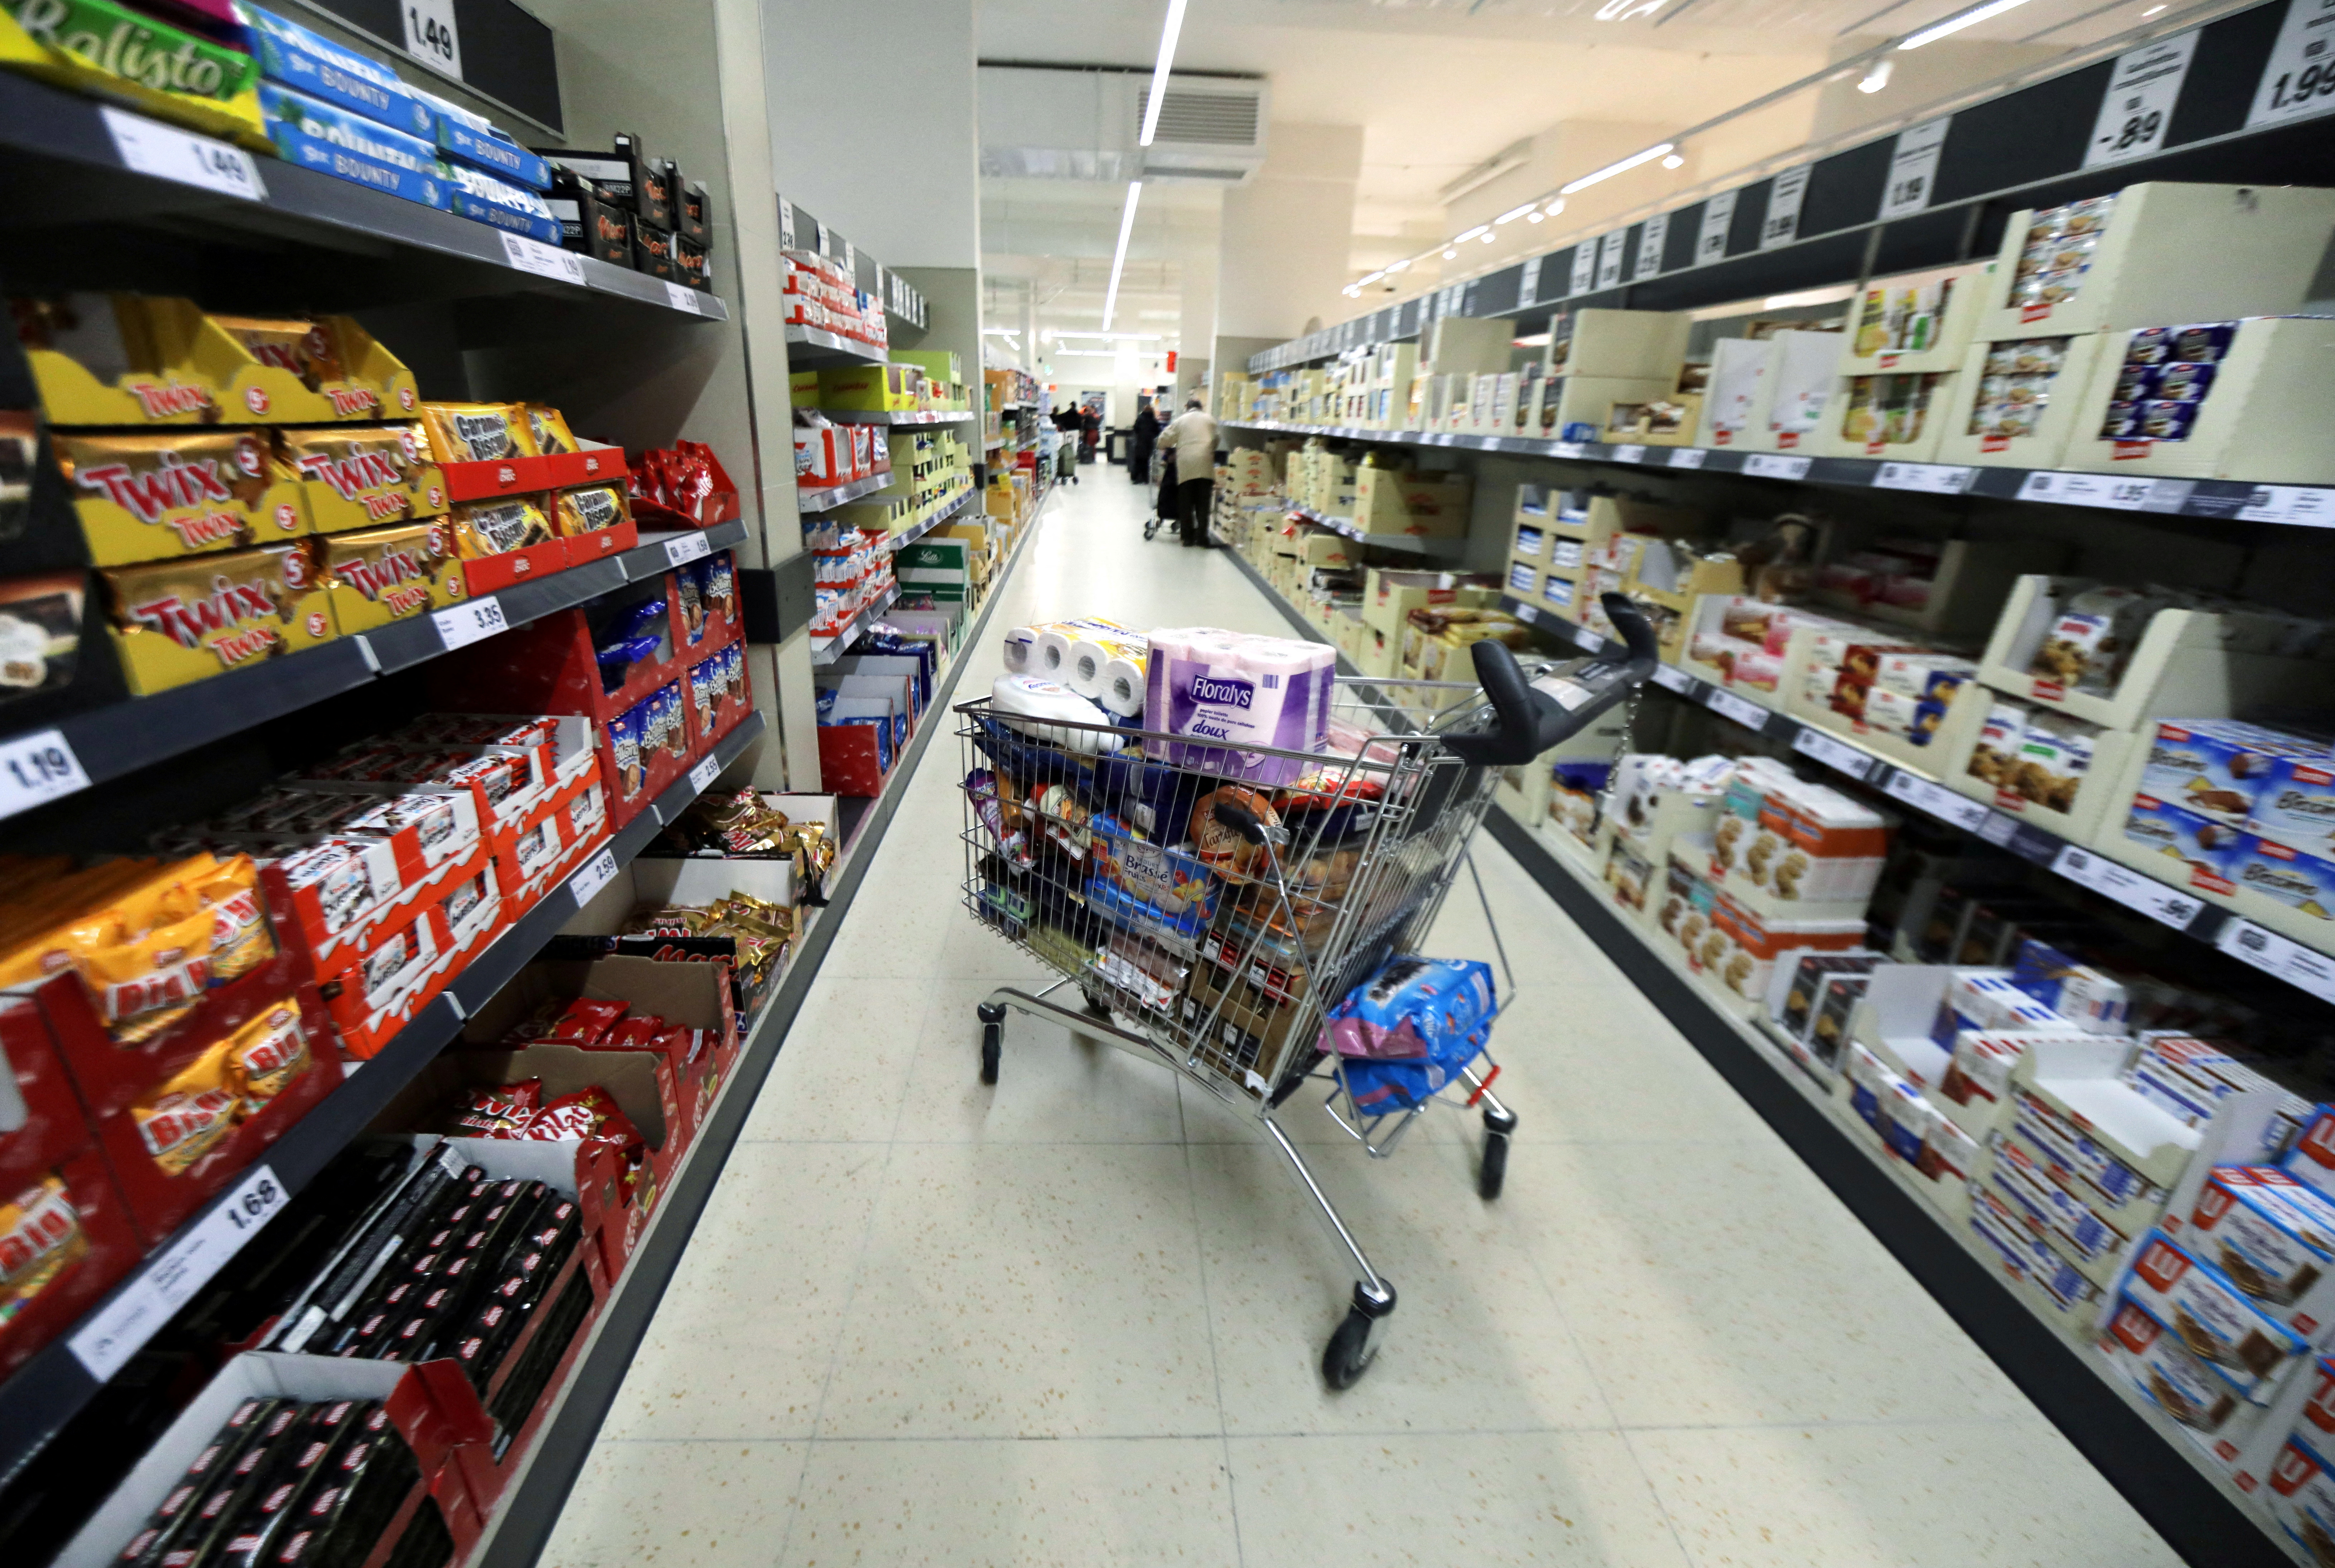 A shopping trolley is seen in a Lidl supermarket in Nice